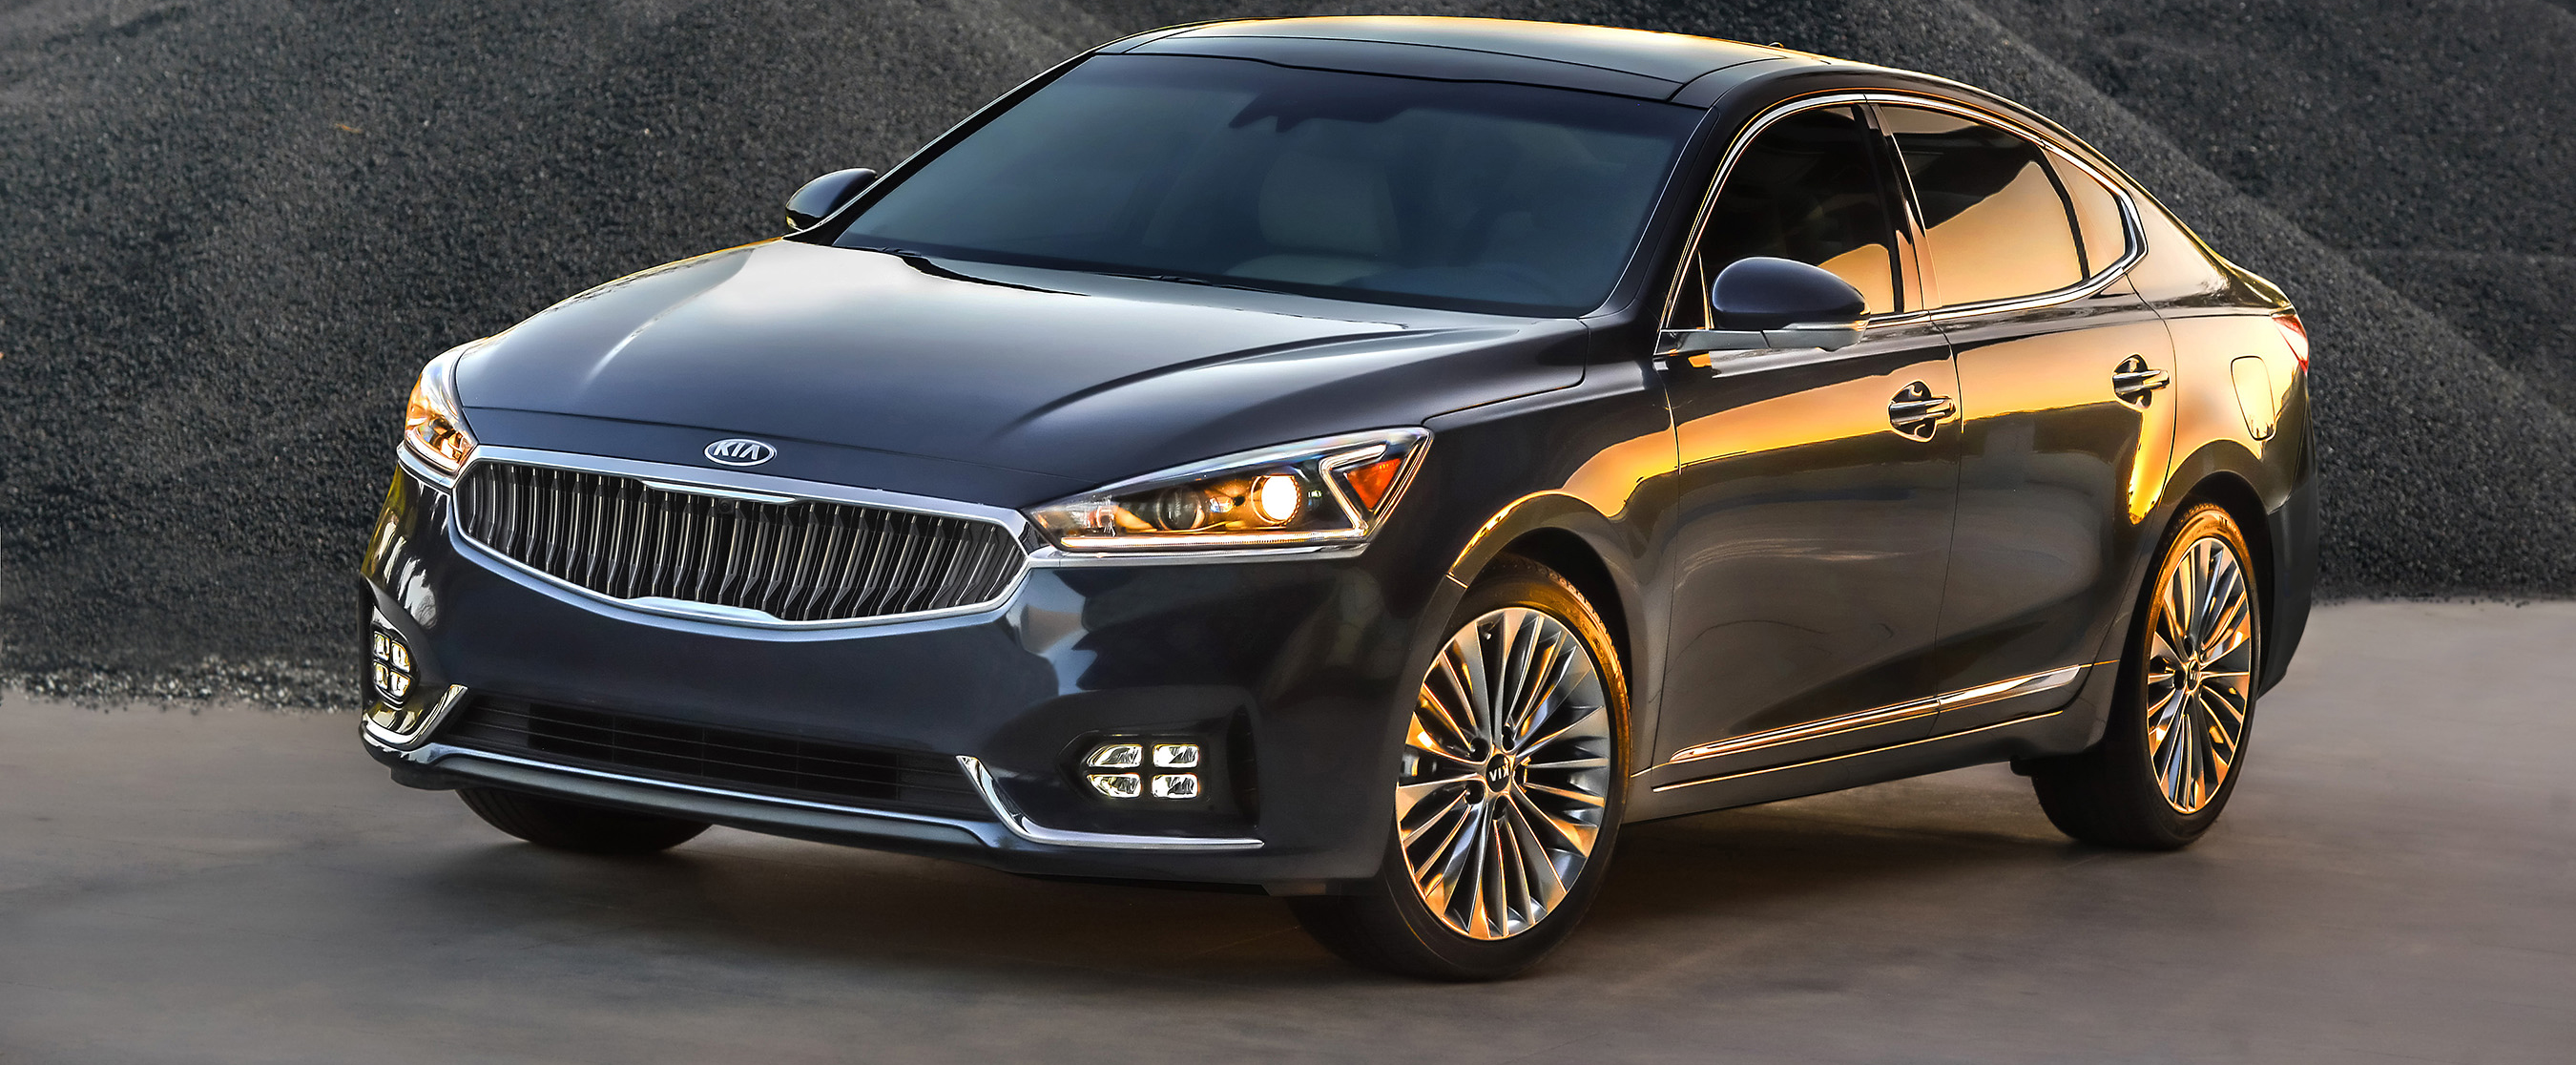 All New 2017 Kia Cadenza Takes The Stage At The New York